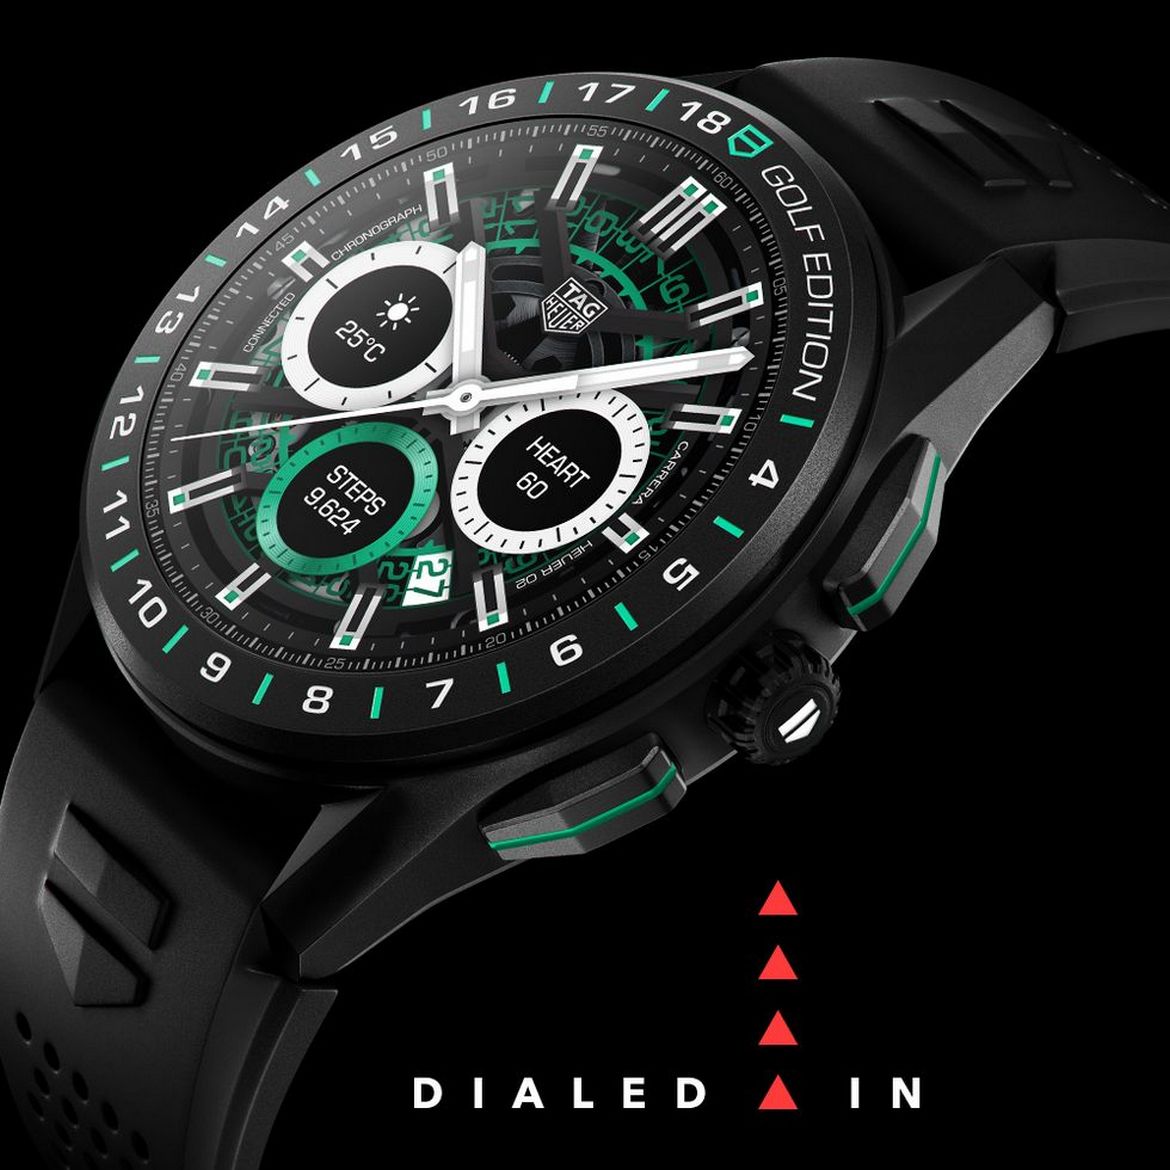 Tag Heuer’s new smartwatch will change the face of your next golf game